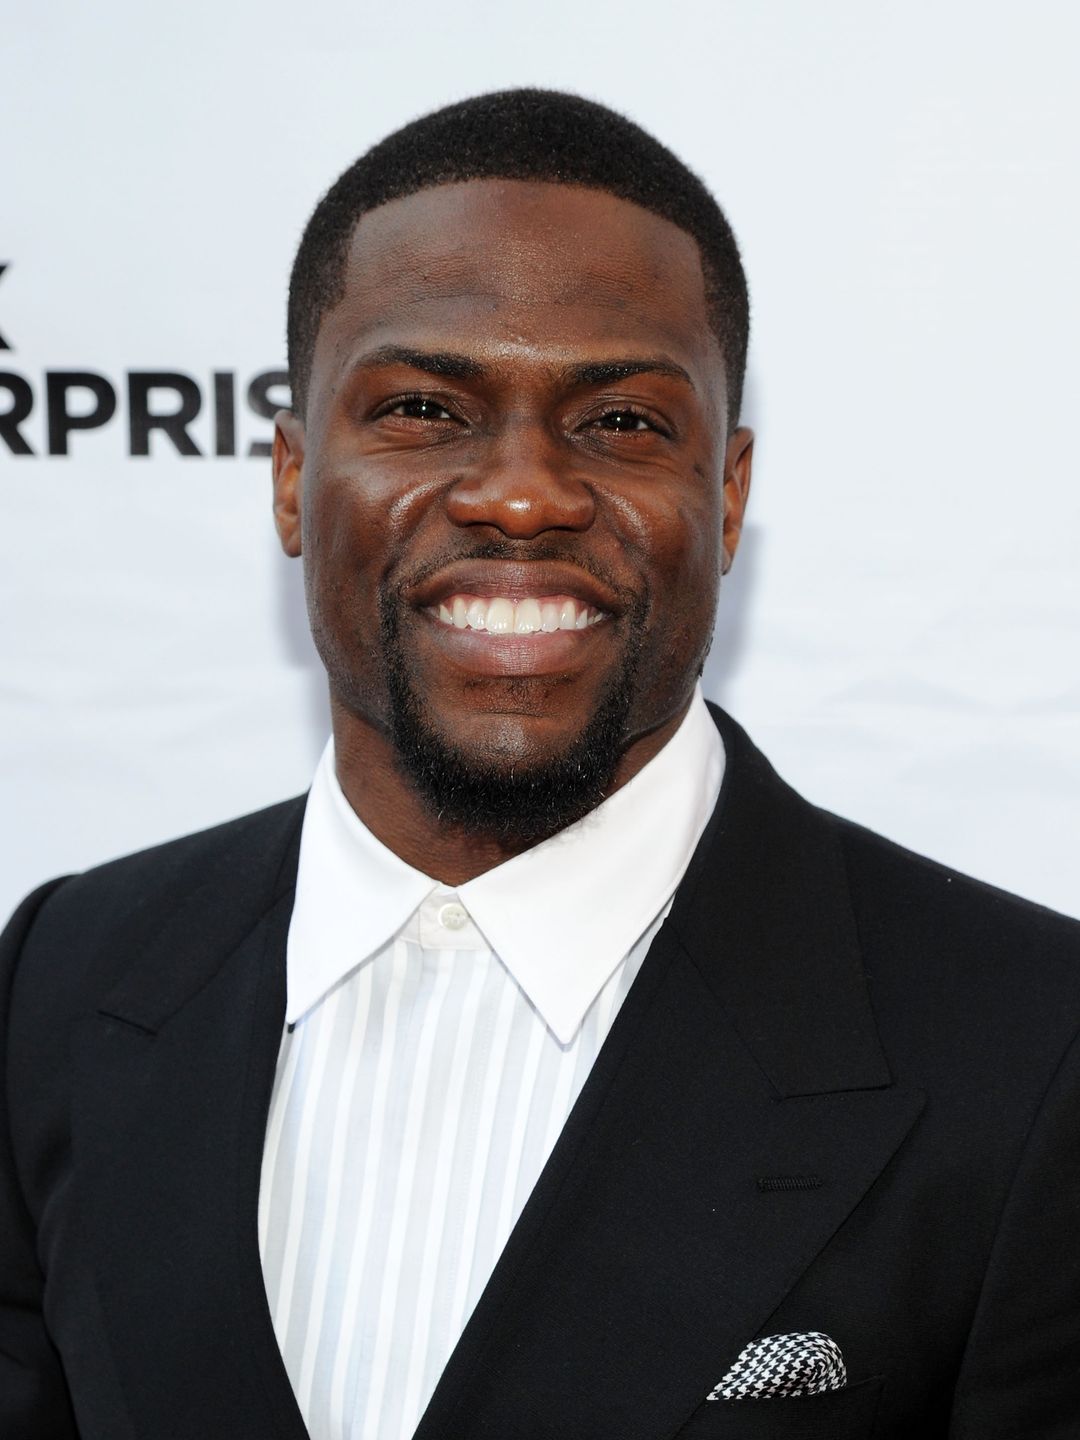 Kevin Hart early life